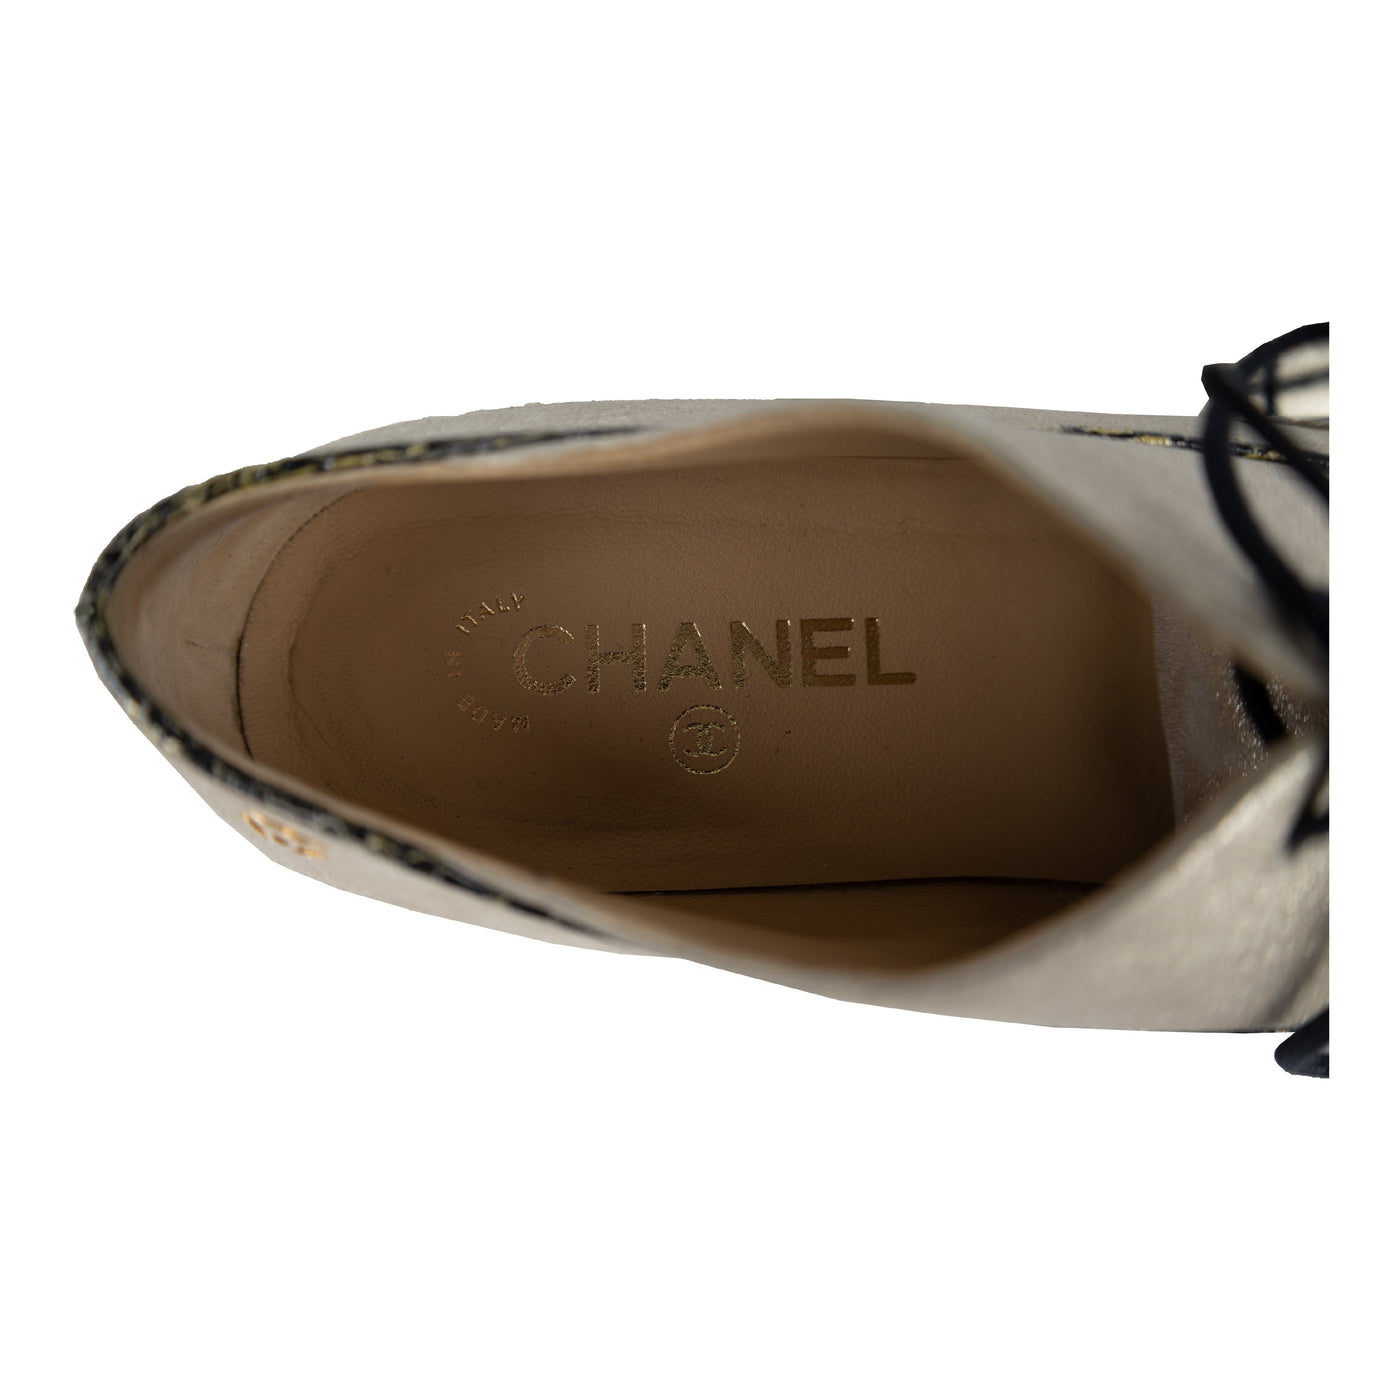 Secondhand Chanel Two-tone Shimmer Lace-up Oxford Shoes